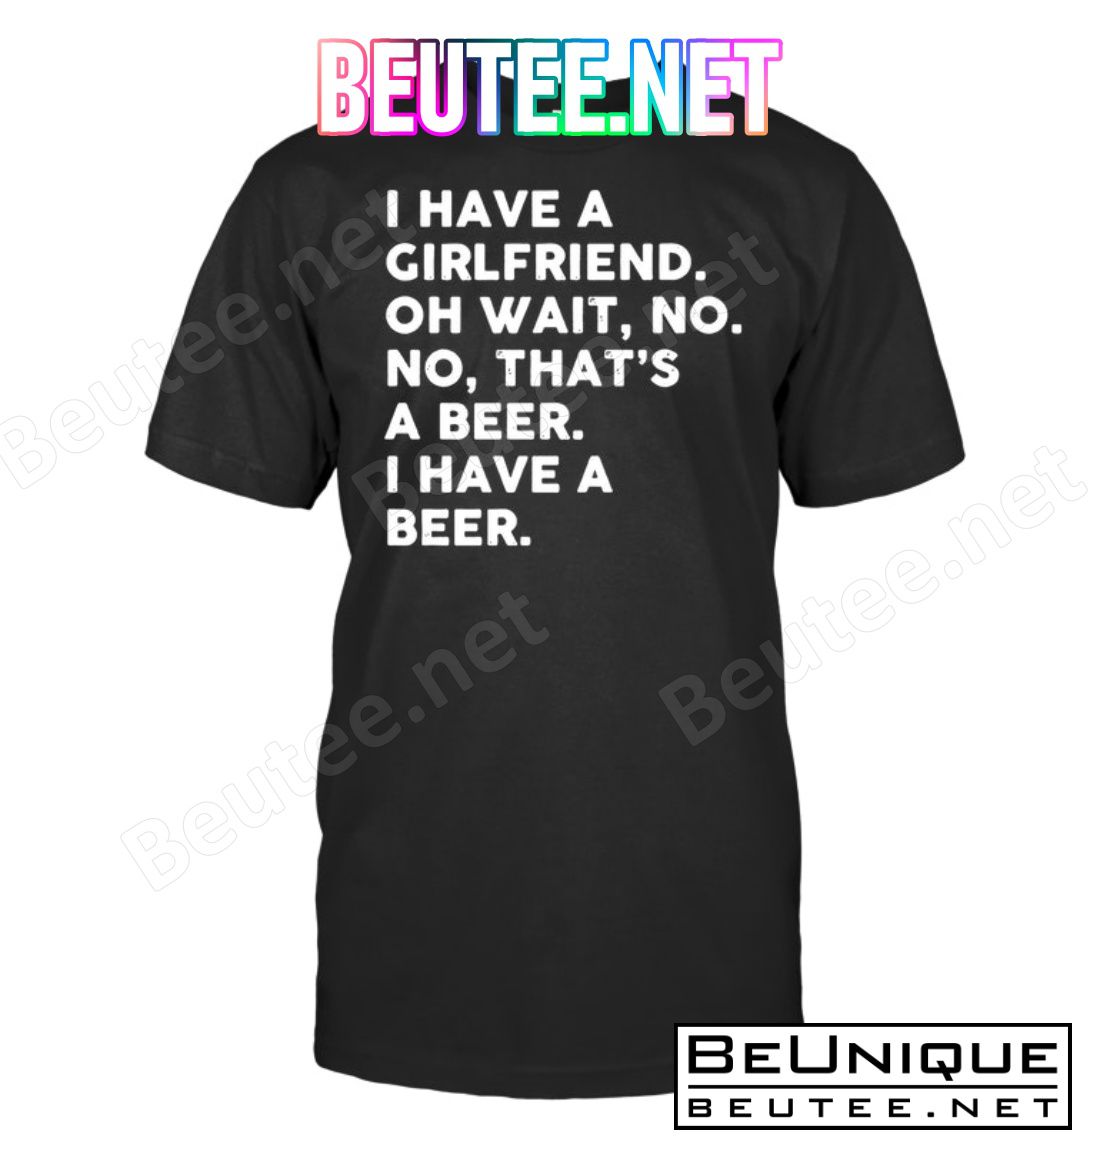 I Have A Girlfriend Oh Wait No No That's Beer I Have A Beer Shirt